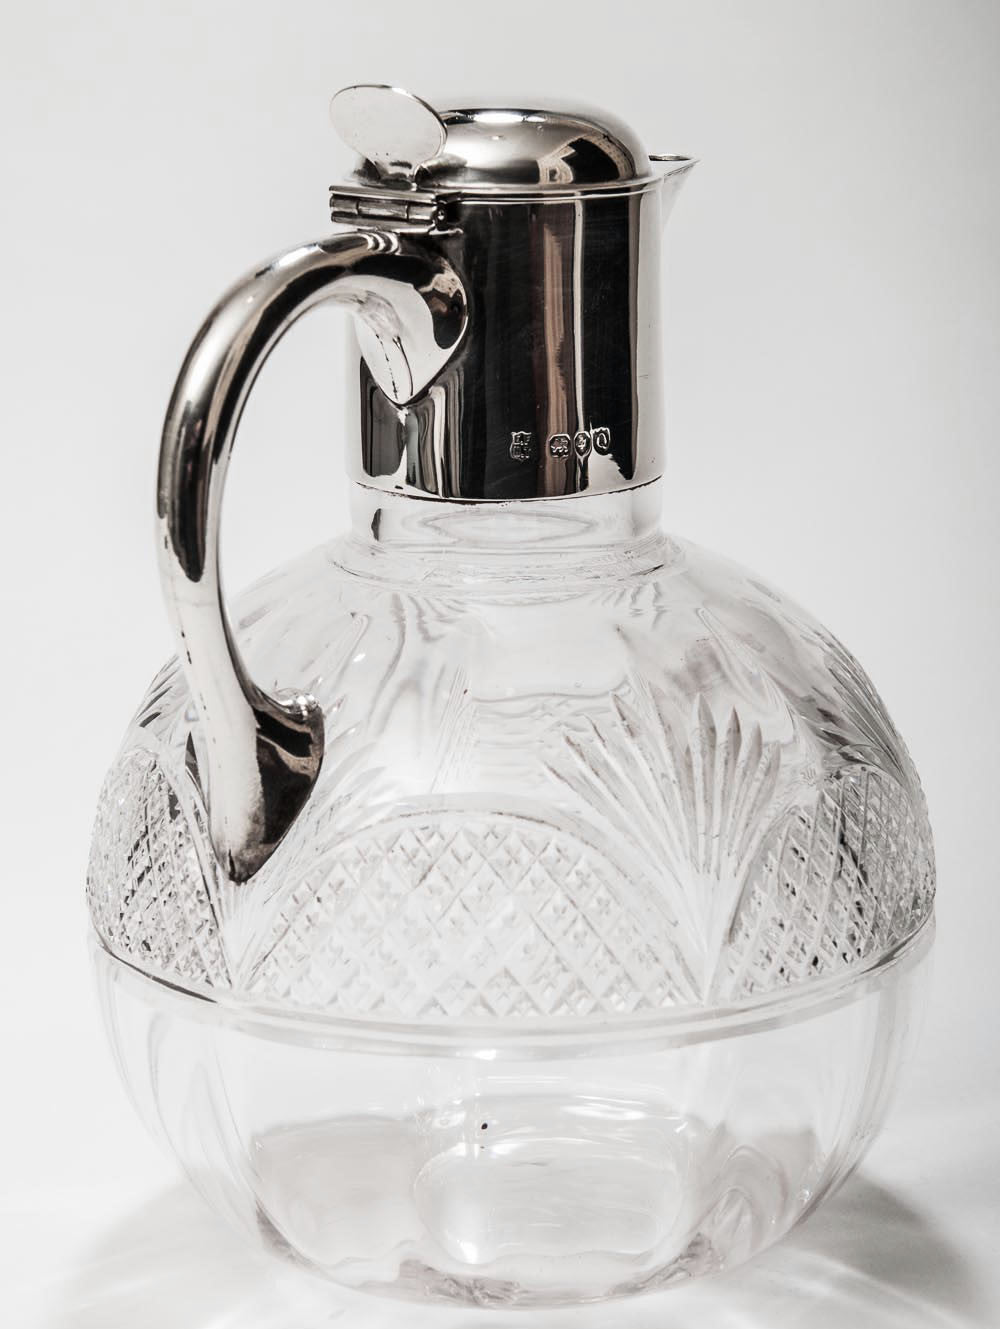 A Victorian Antique Cut Glass Claret Jug With Hallmarked London 1891 Silver Mount (Code 8006) - Blue Cherry Antiques - 3